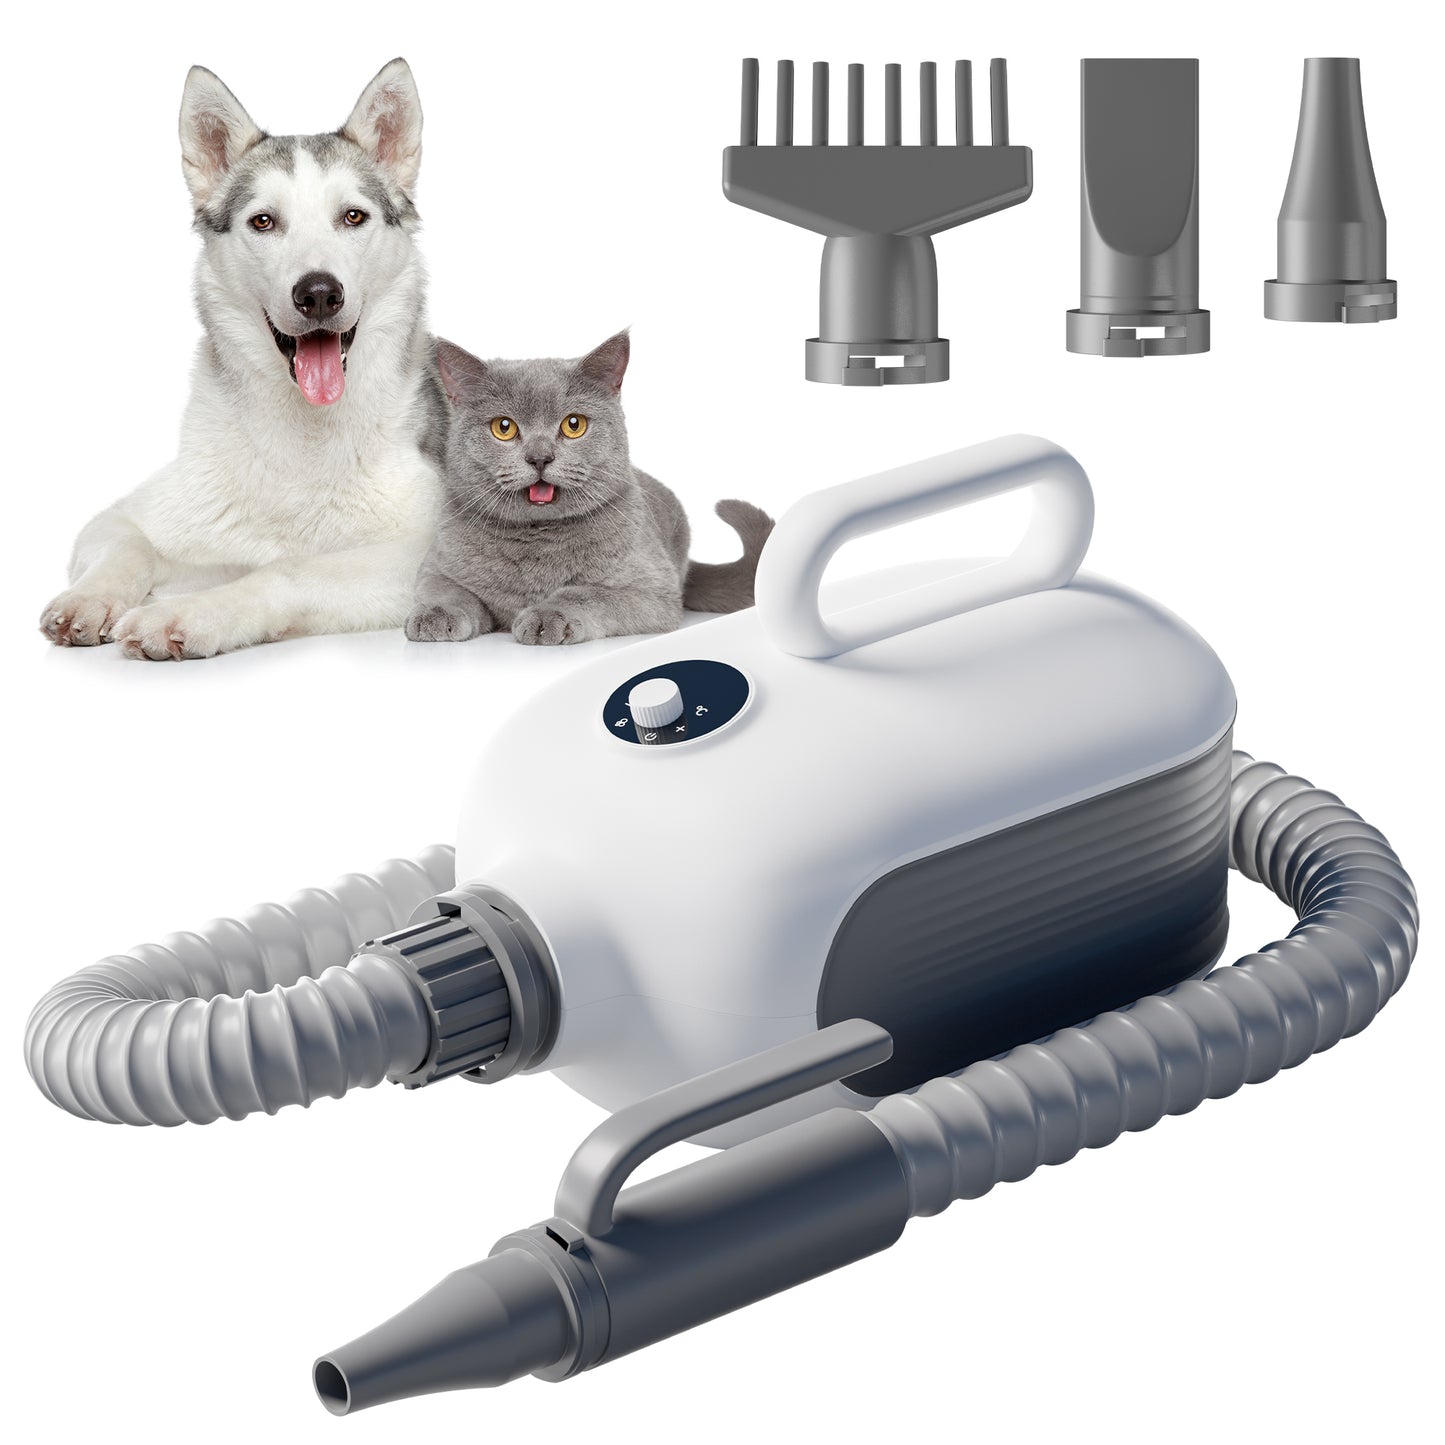 Fido Fave Dog Dryer High Velocity Professional Dog/Pet Grooming Force Hair Dryer/Blower